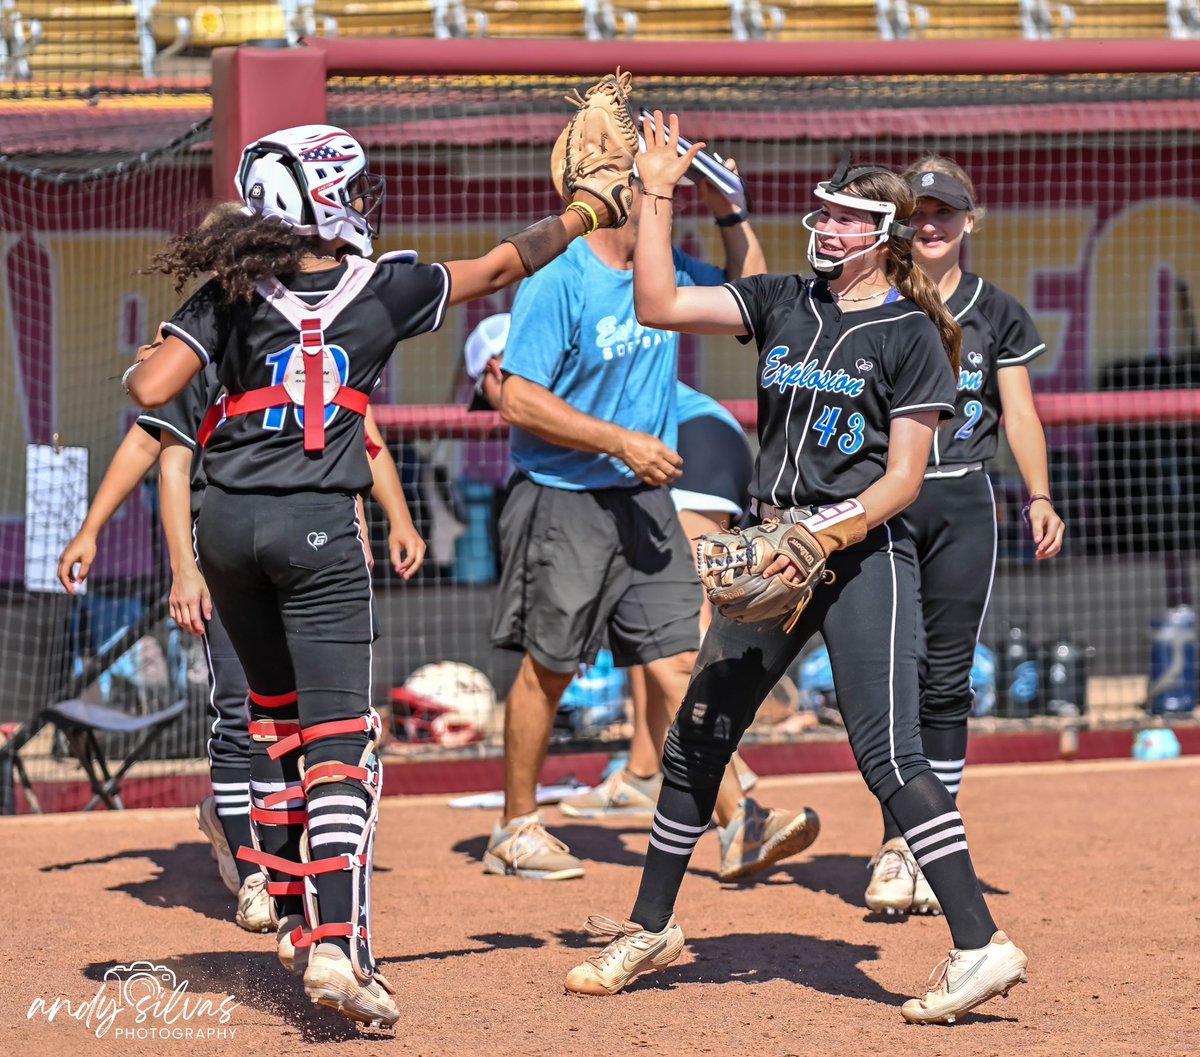 Sights from today’s @PGFnetwork Labor Day Weekend 14u Championship game. @explosionaz at ASU #nikonphotography #softballphotography #andysilvasphotography